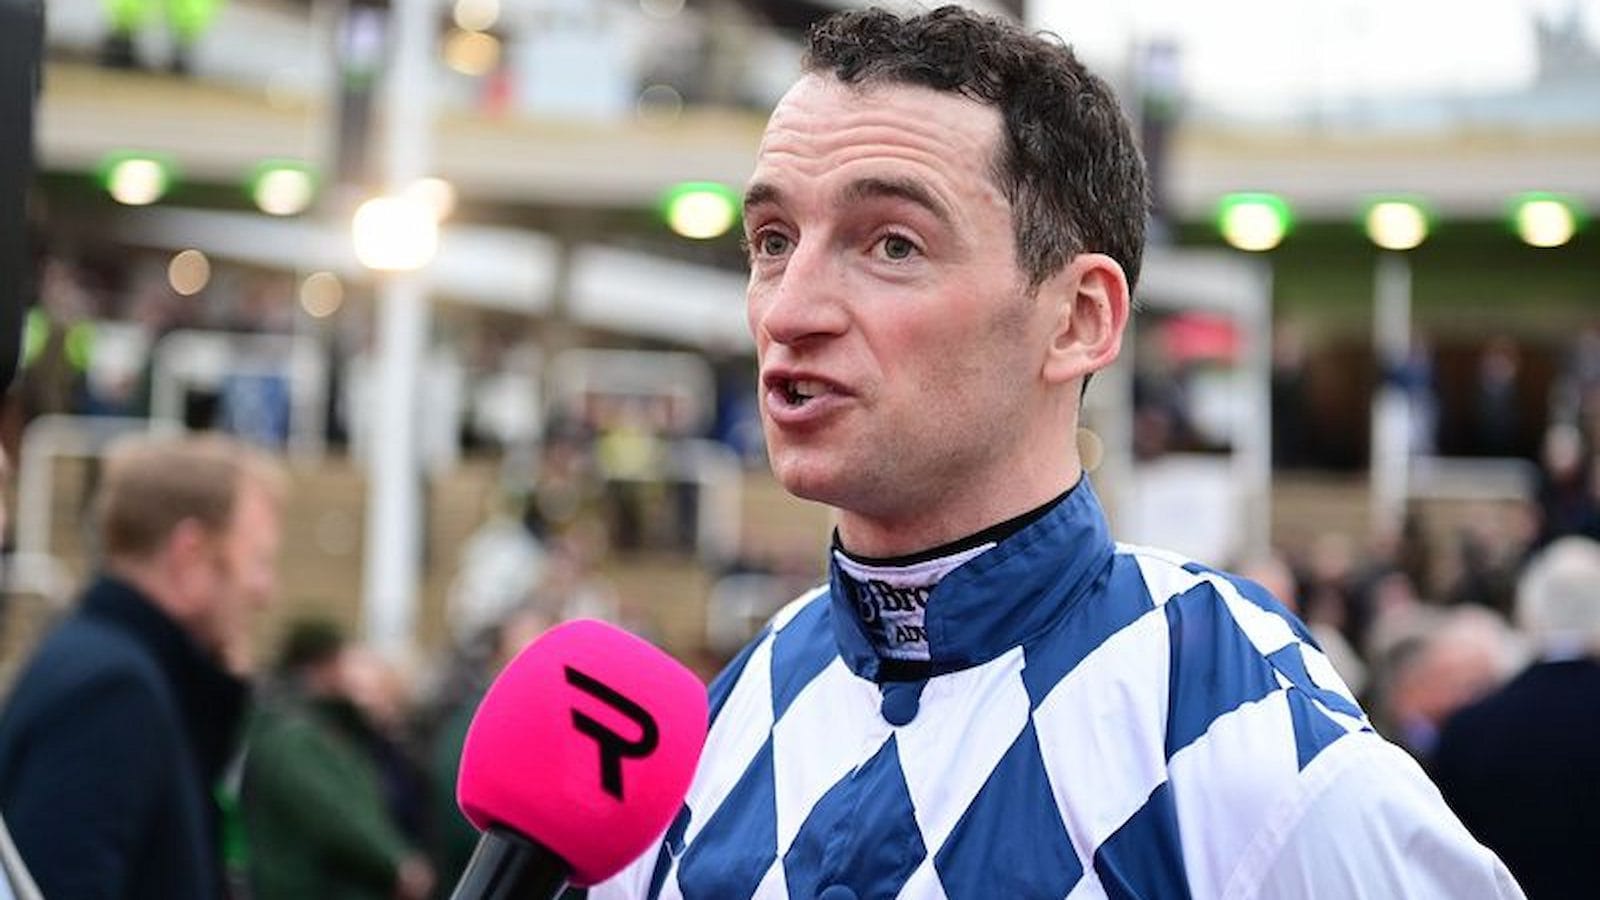 Patrick Mullins' Cheltenham Festival whip ban reduced by 50% following a successful appeal: 'I'm facing accusations without substantial proof.'